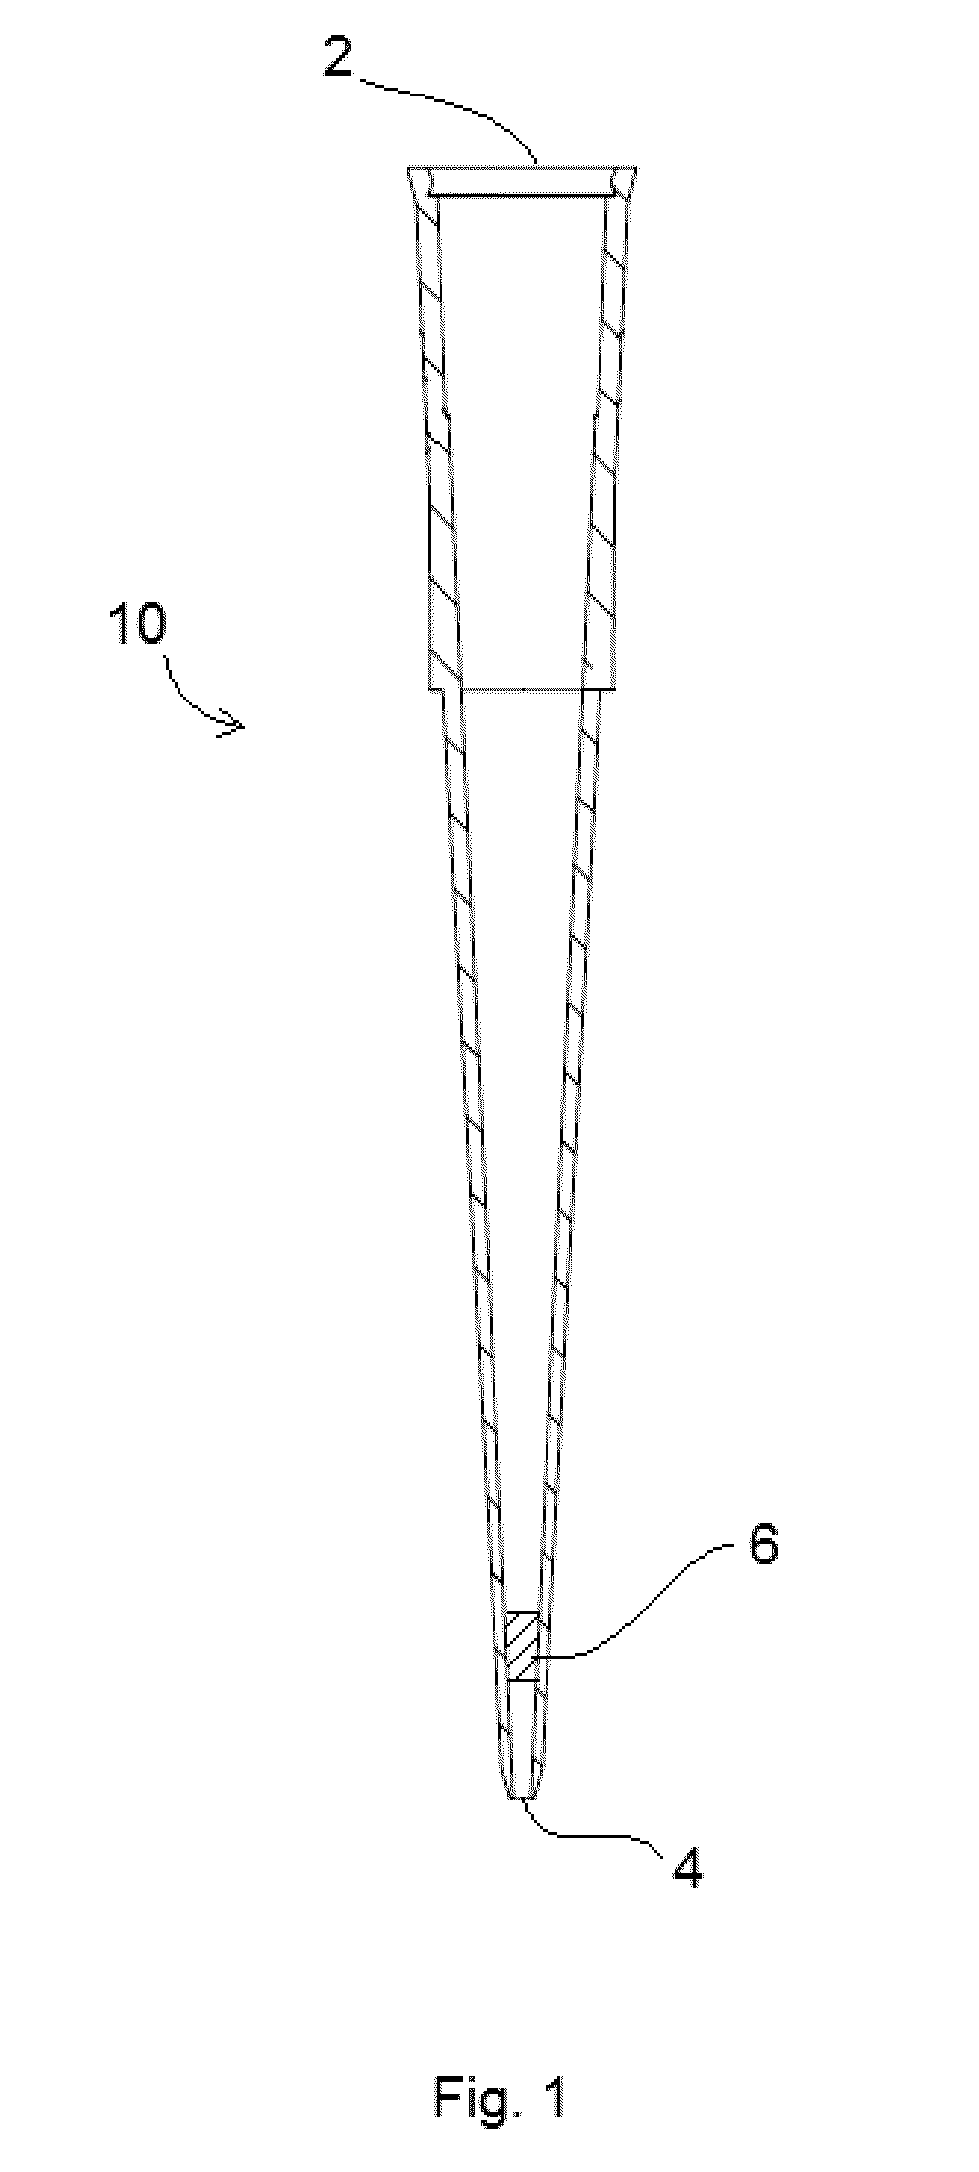 Automated system for handling components of a chromatographic system